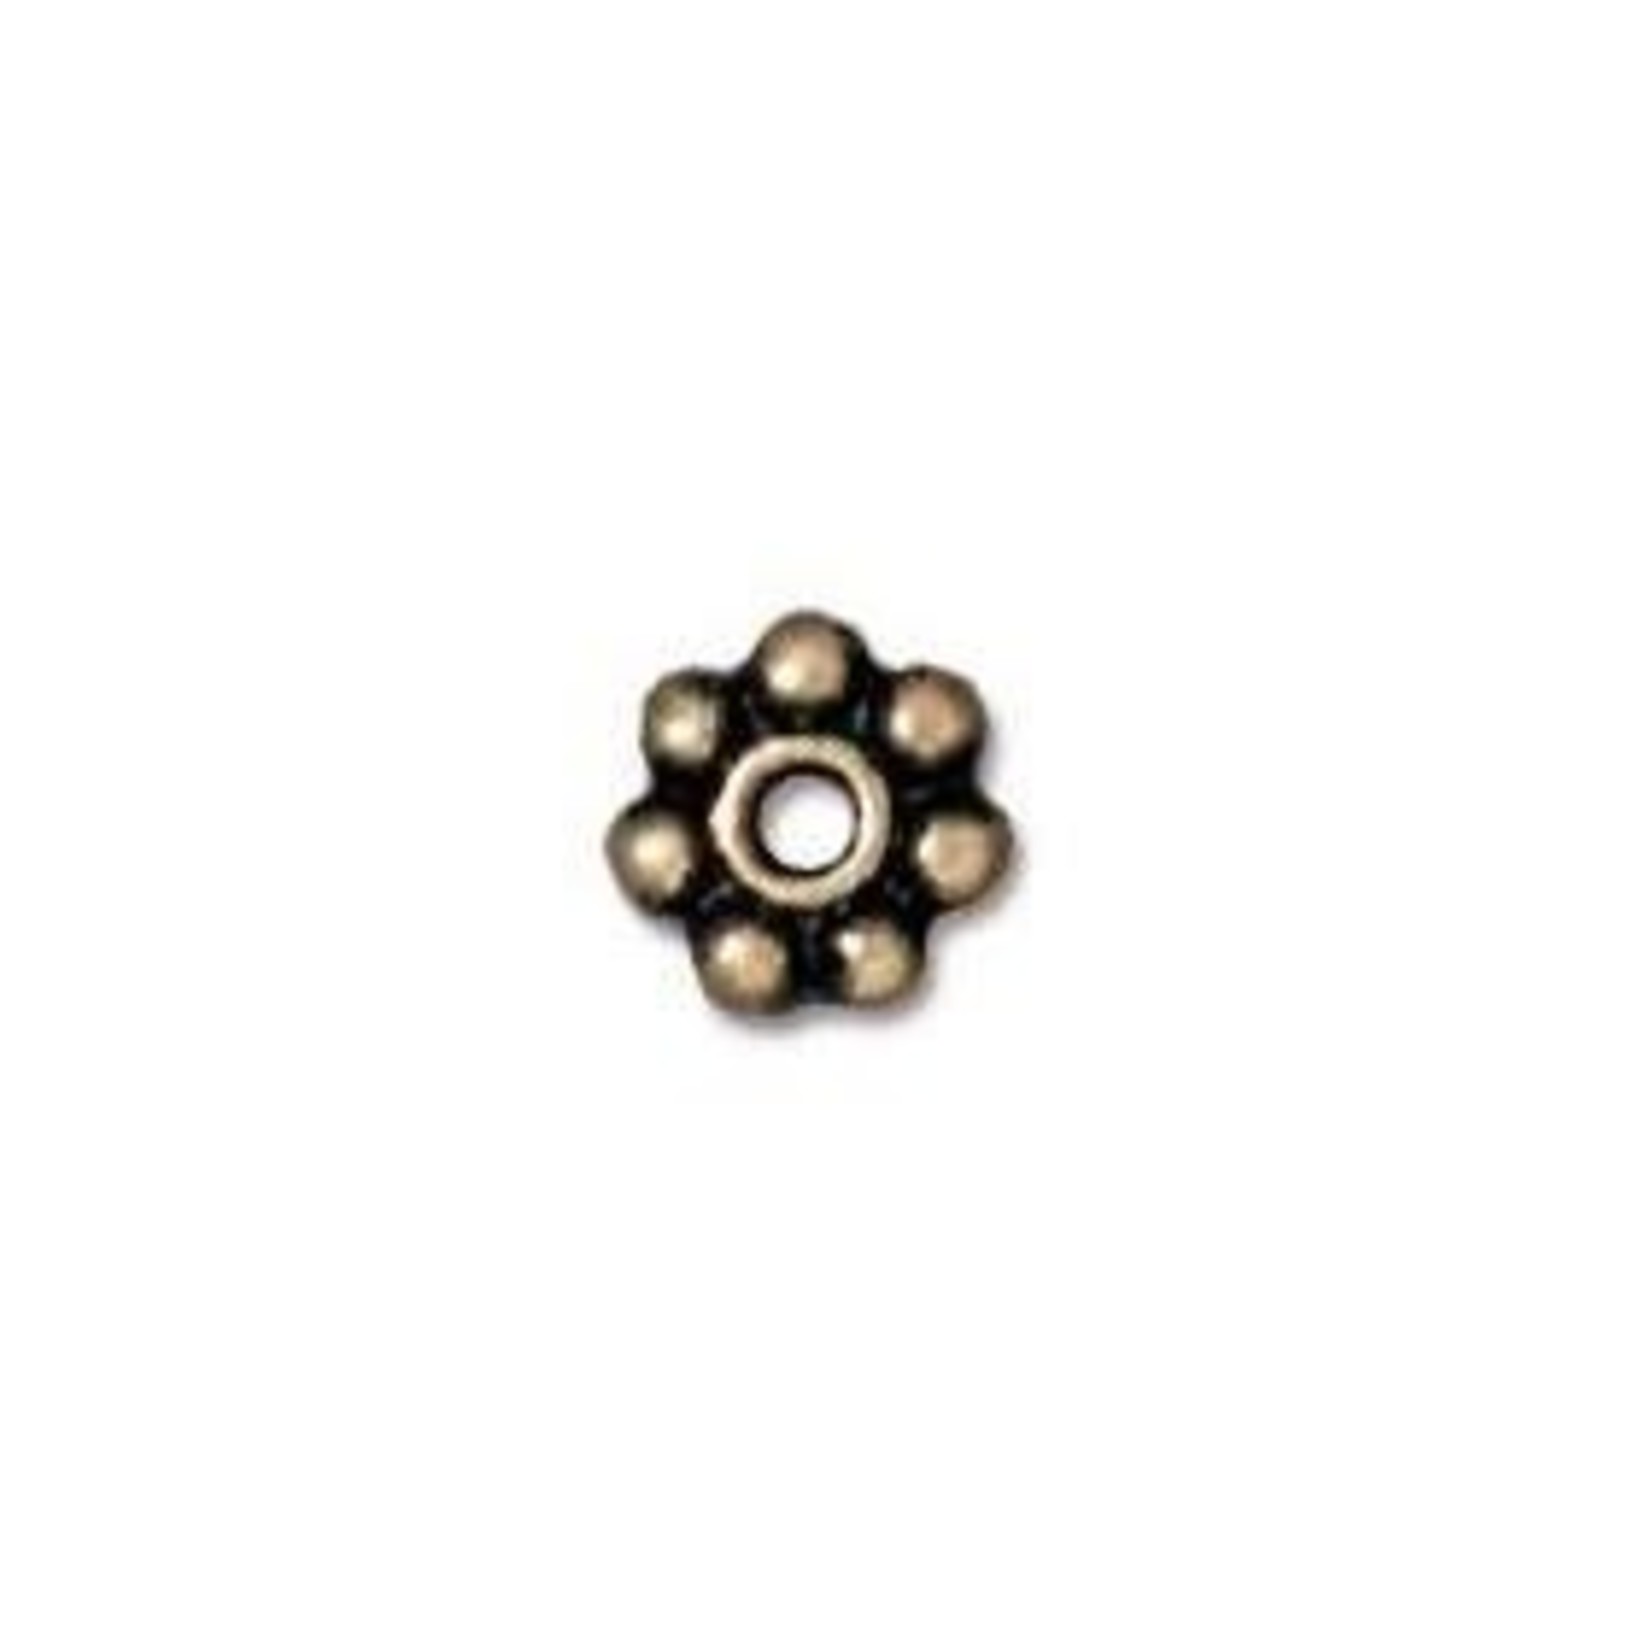 Tierracast Brass Oxide Plated 4mm Beaded Daisy Spacer Bead - 100 pieces